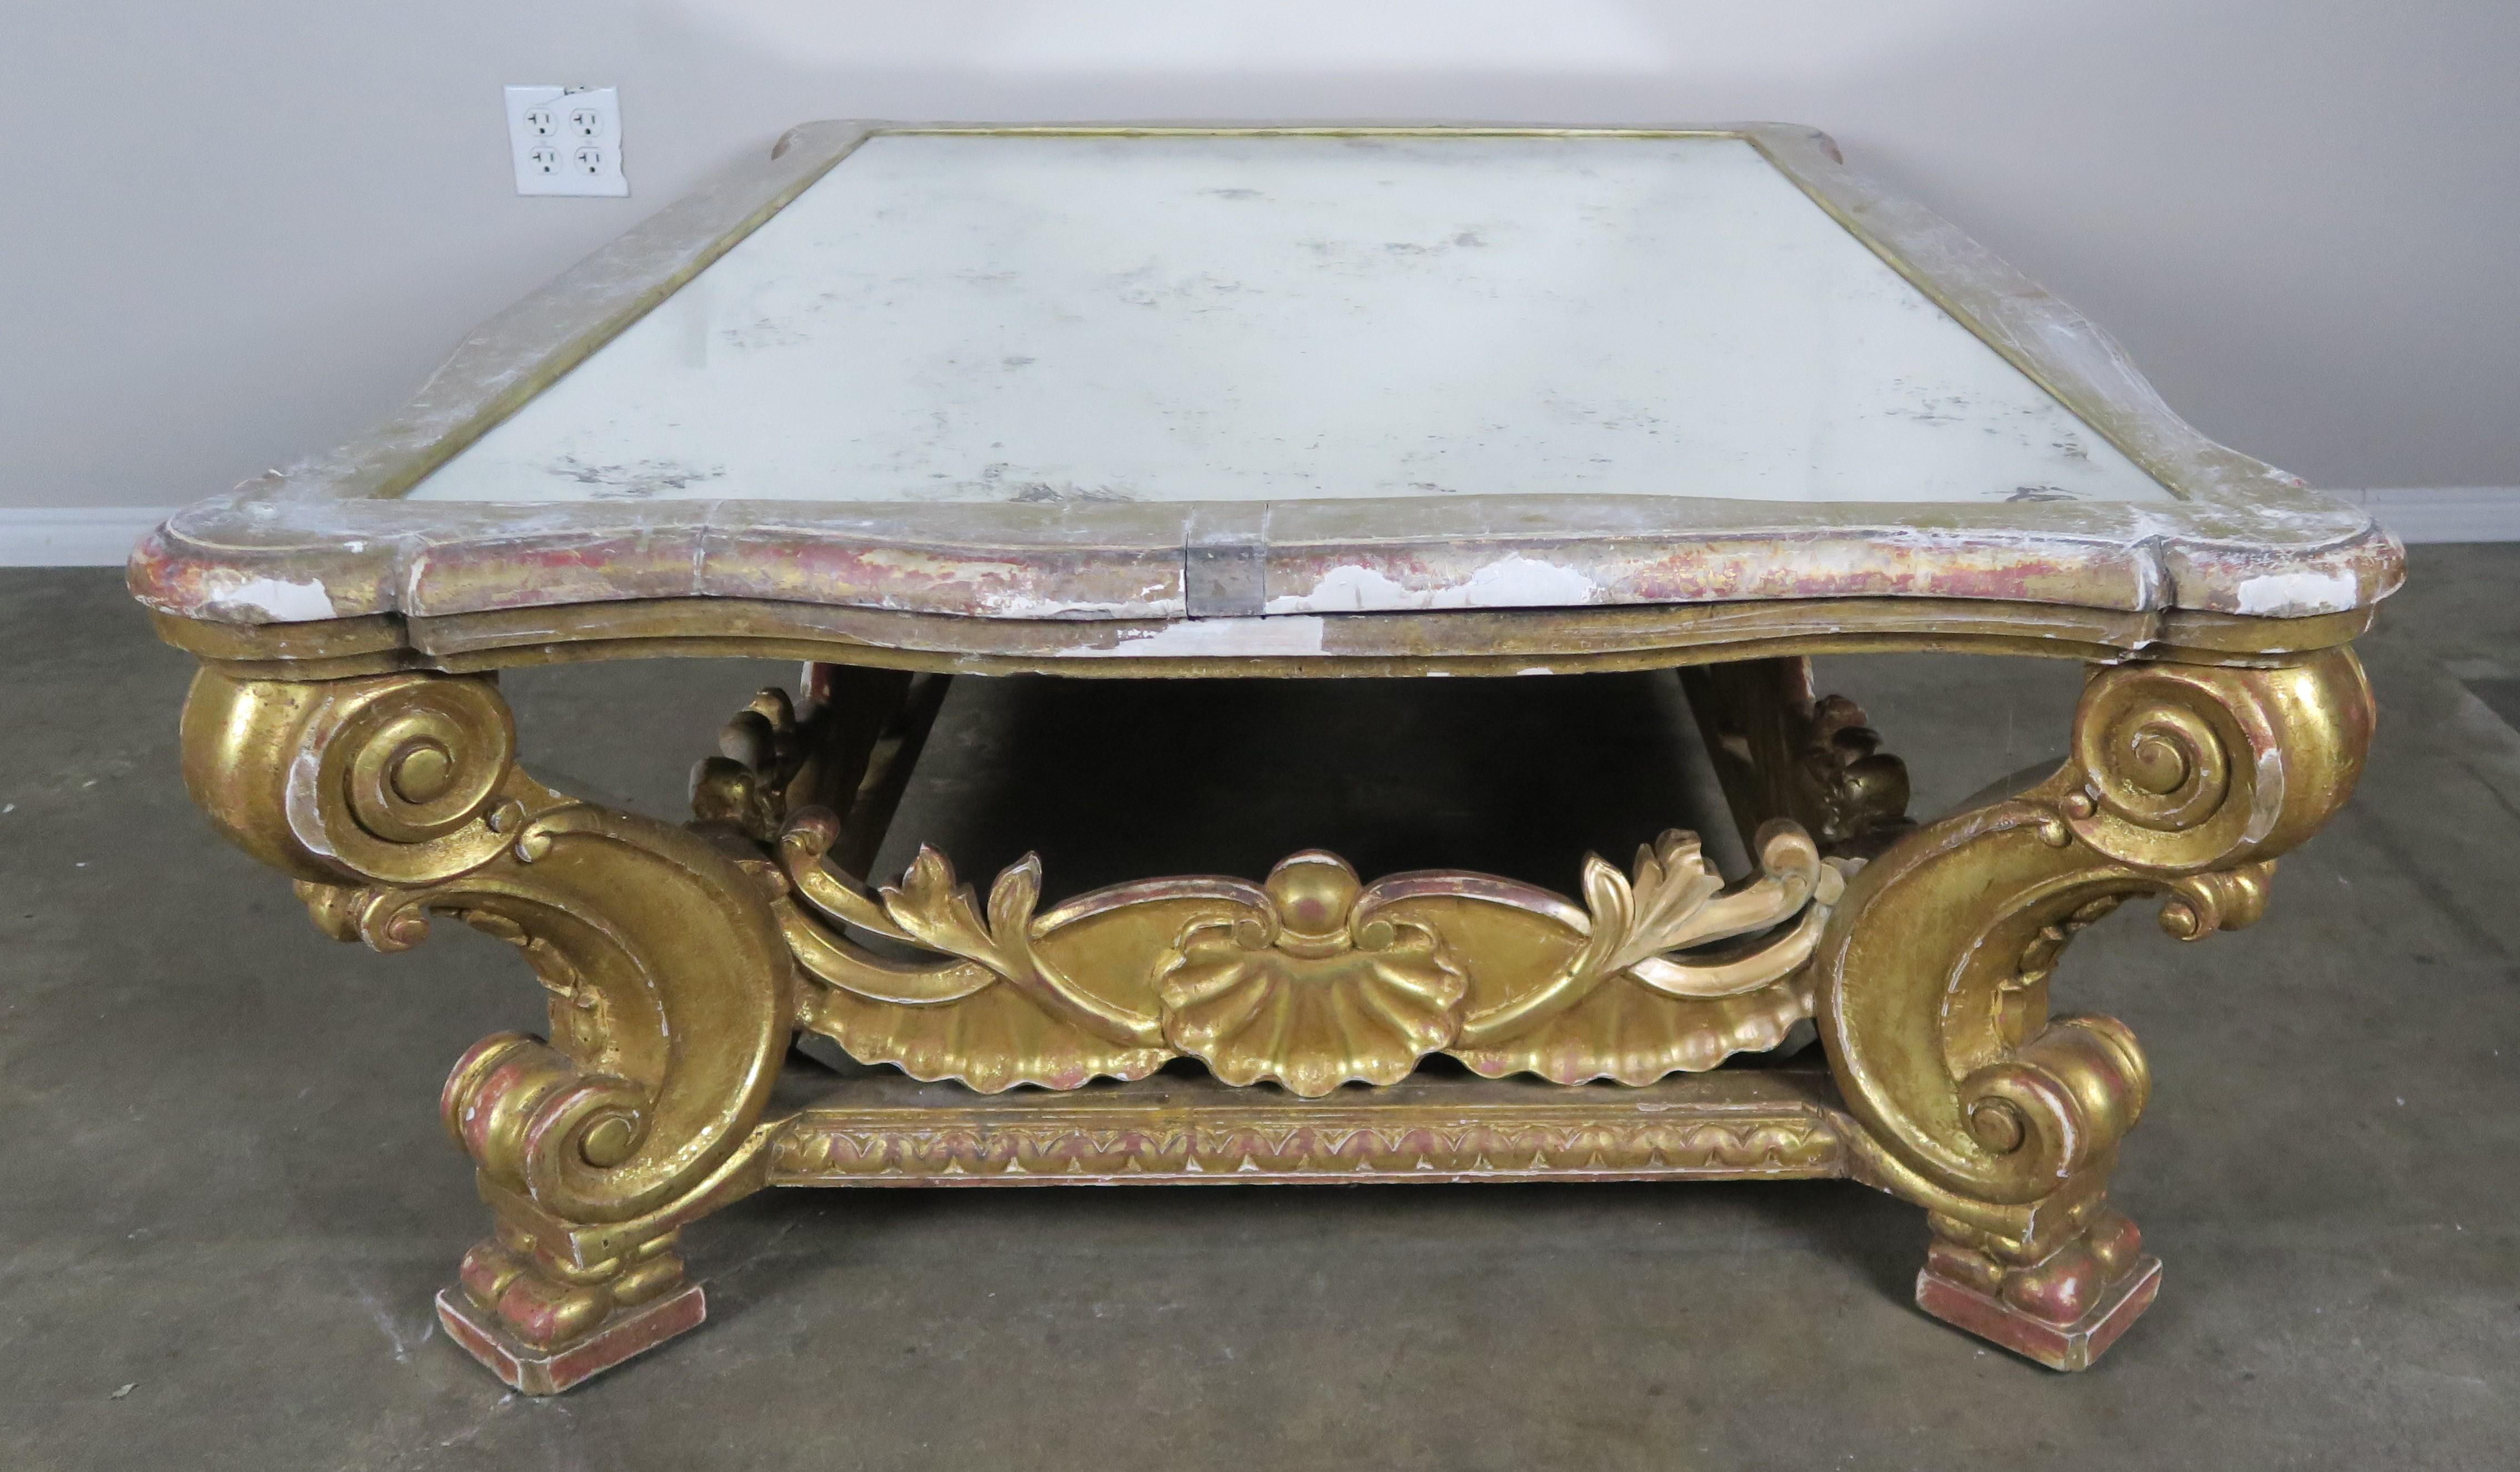 Italian Giltwood Coffee Table with Antique Mirrored Top 1